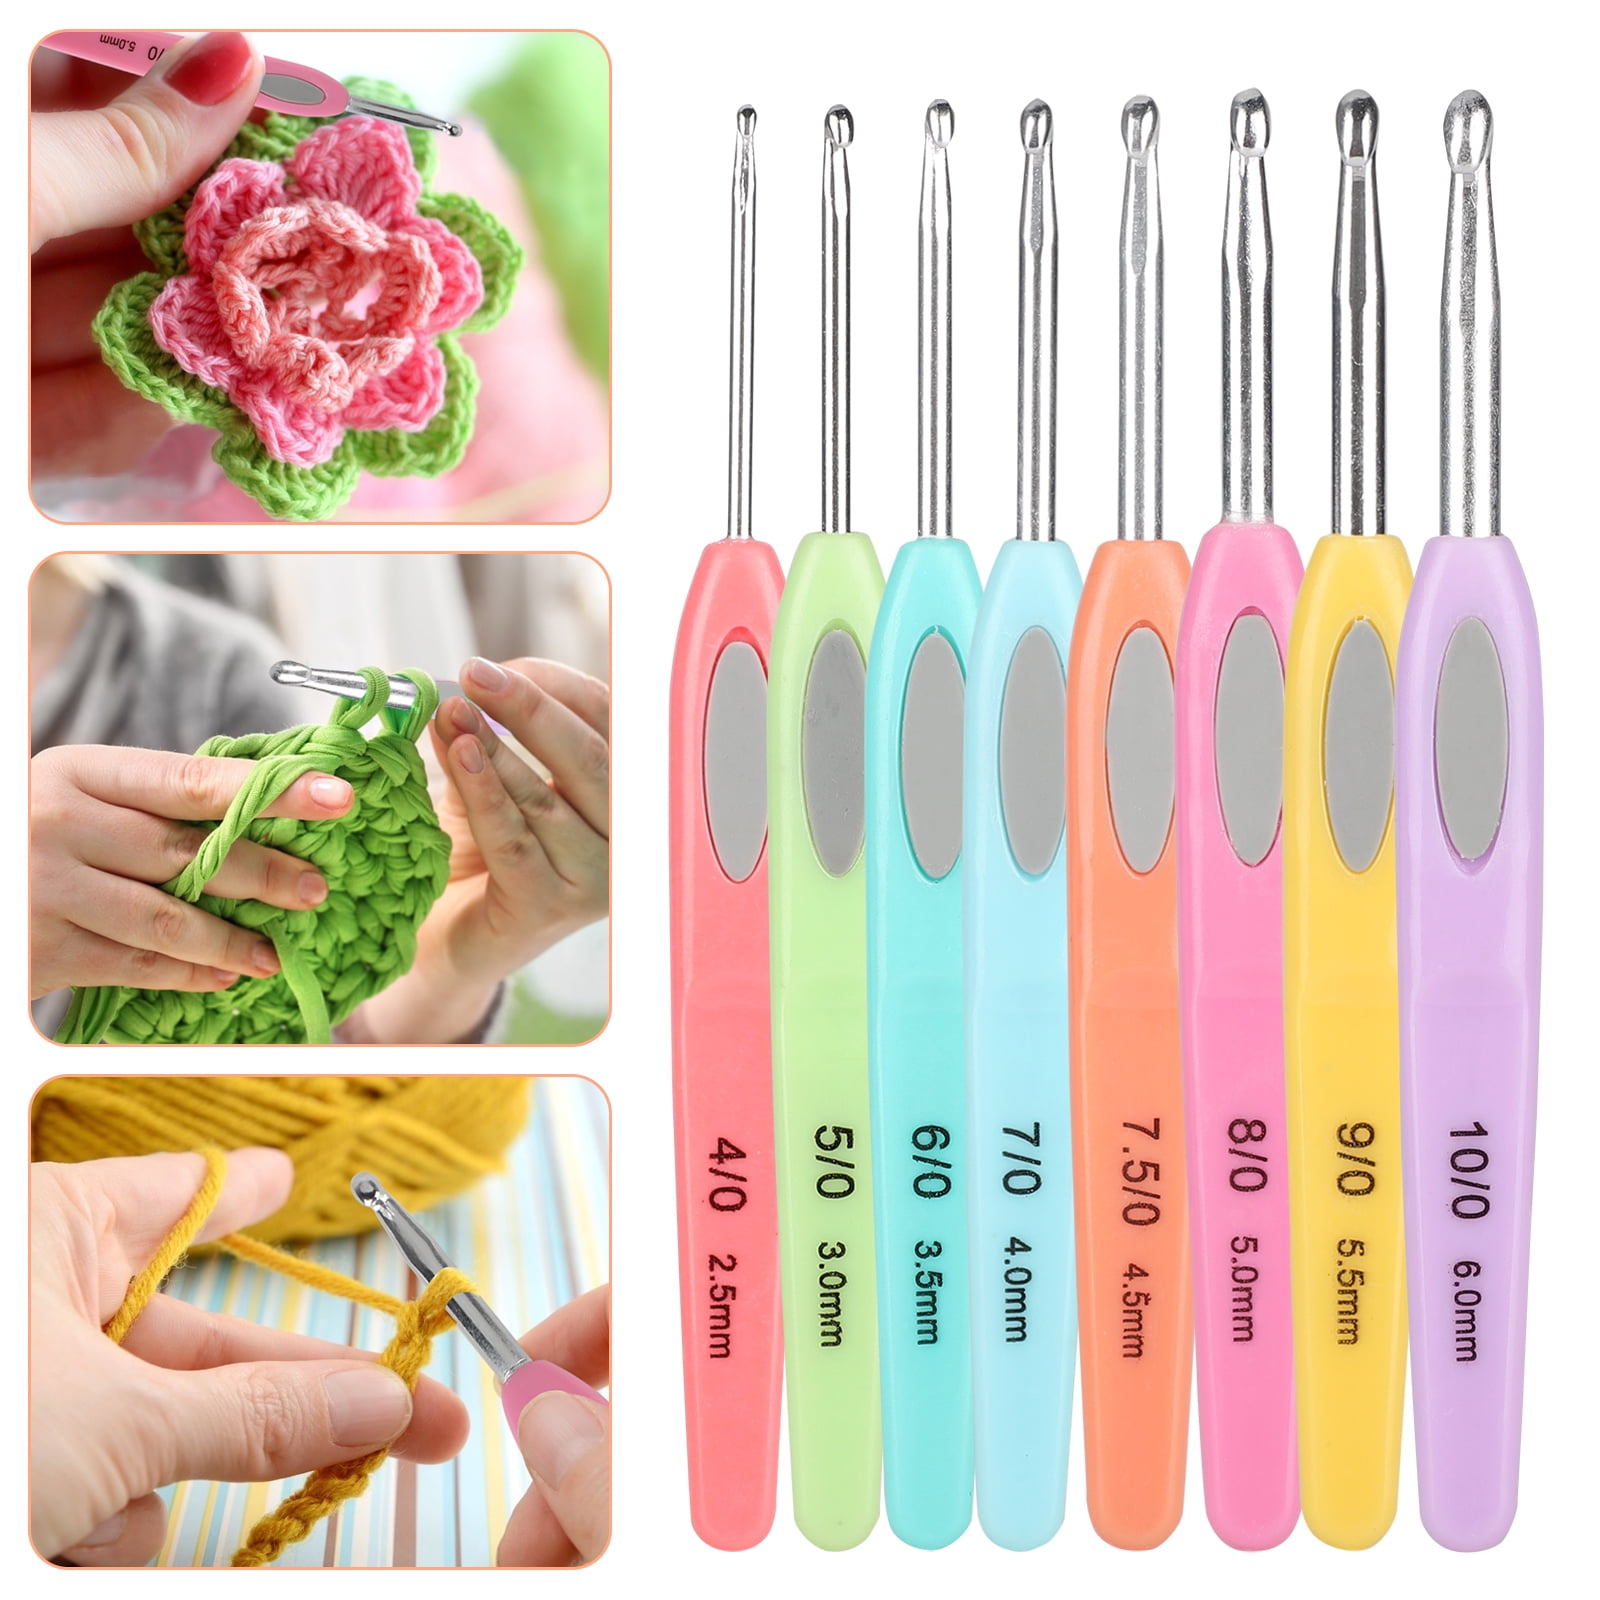 2.75mm Crochet Hook, Ergonomic Handle for Arthritic Hands, Soft Rubber Grip  Extra Long Knitting Needles for Beginners and Knitting Crocheting Yarn